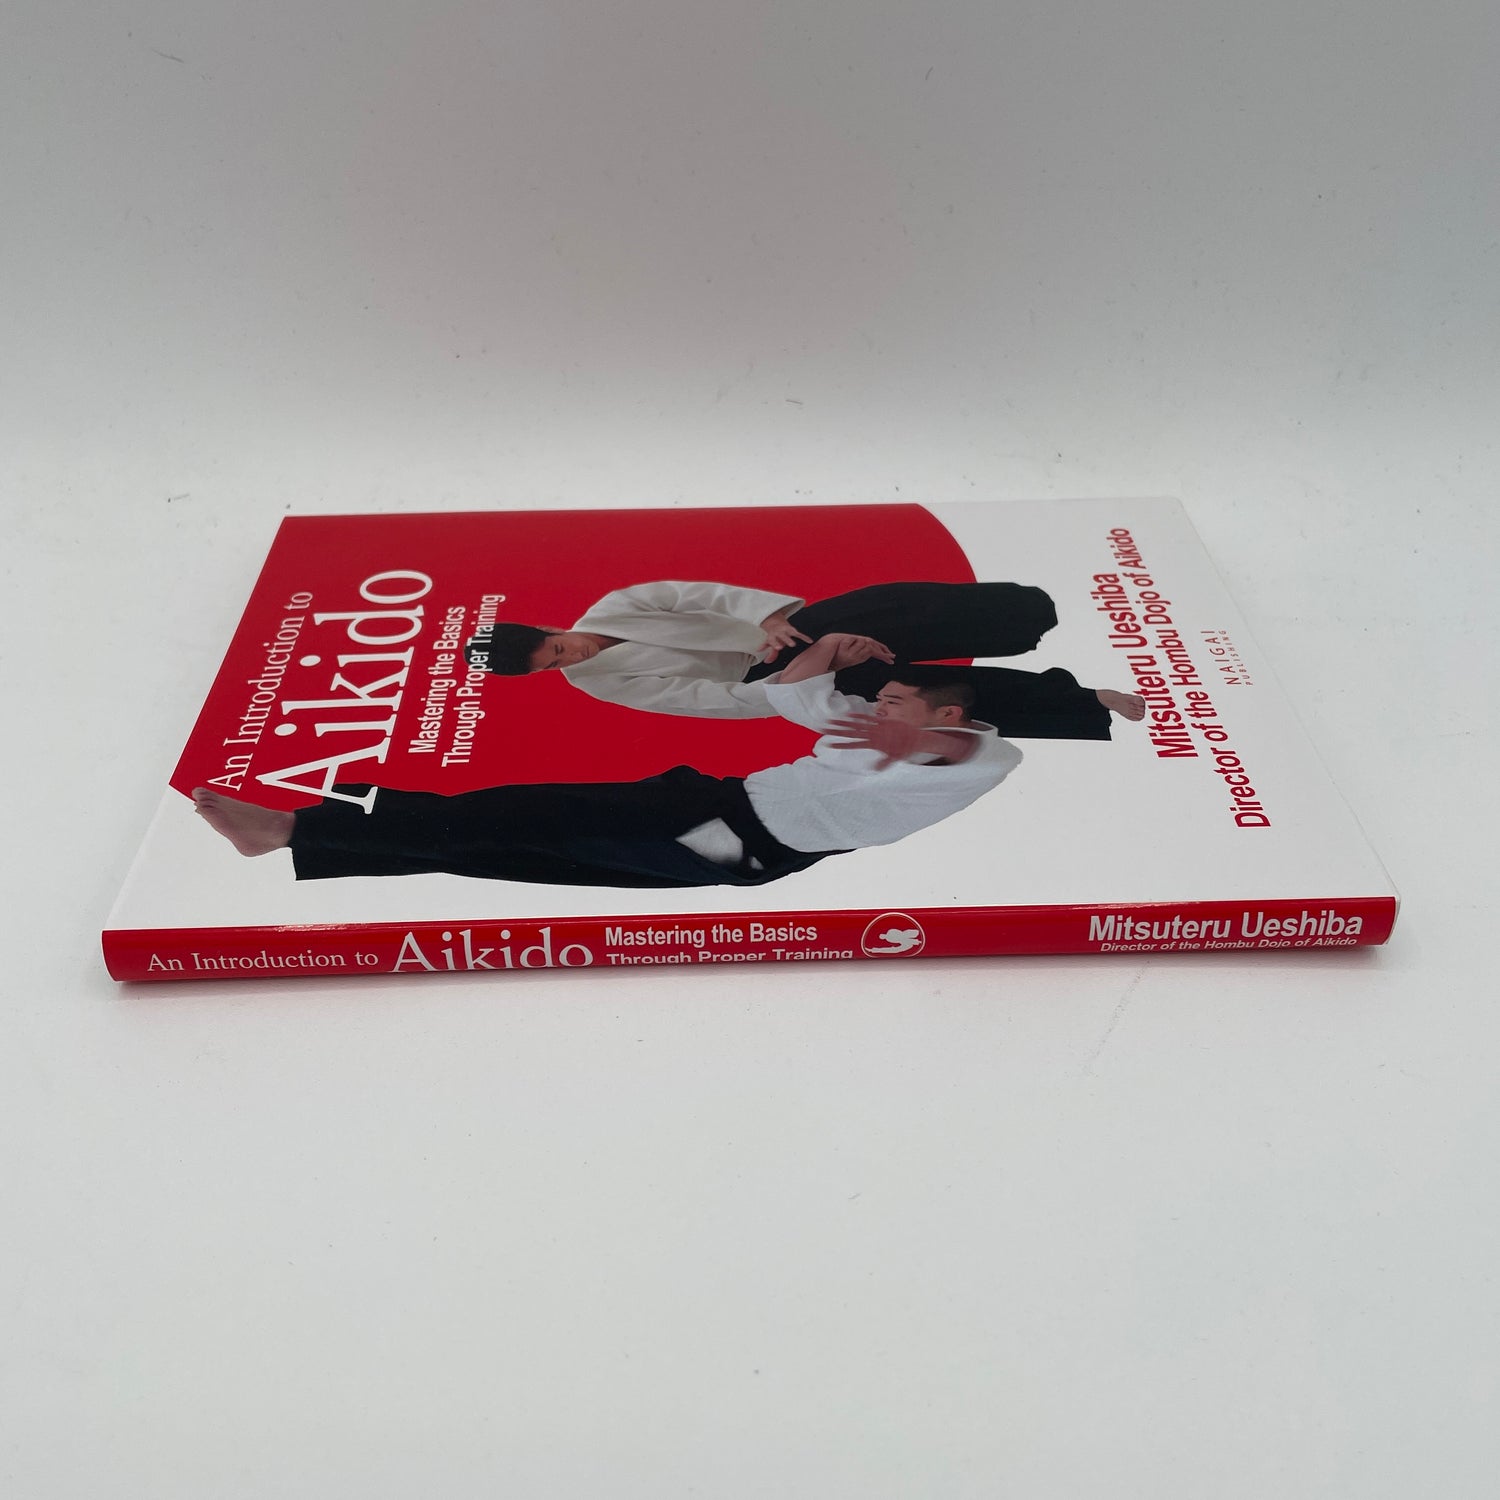 An Introduction to Aikido Mastering the Basics Through Proper Training Book by Mitsuteru Ueshiba (Preowned)